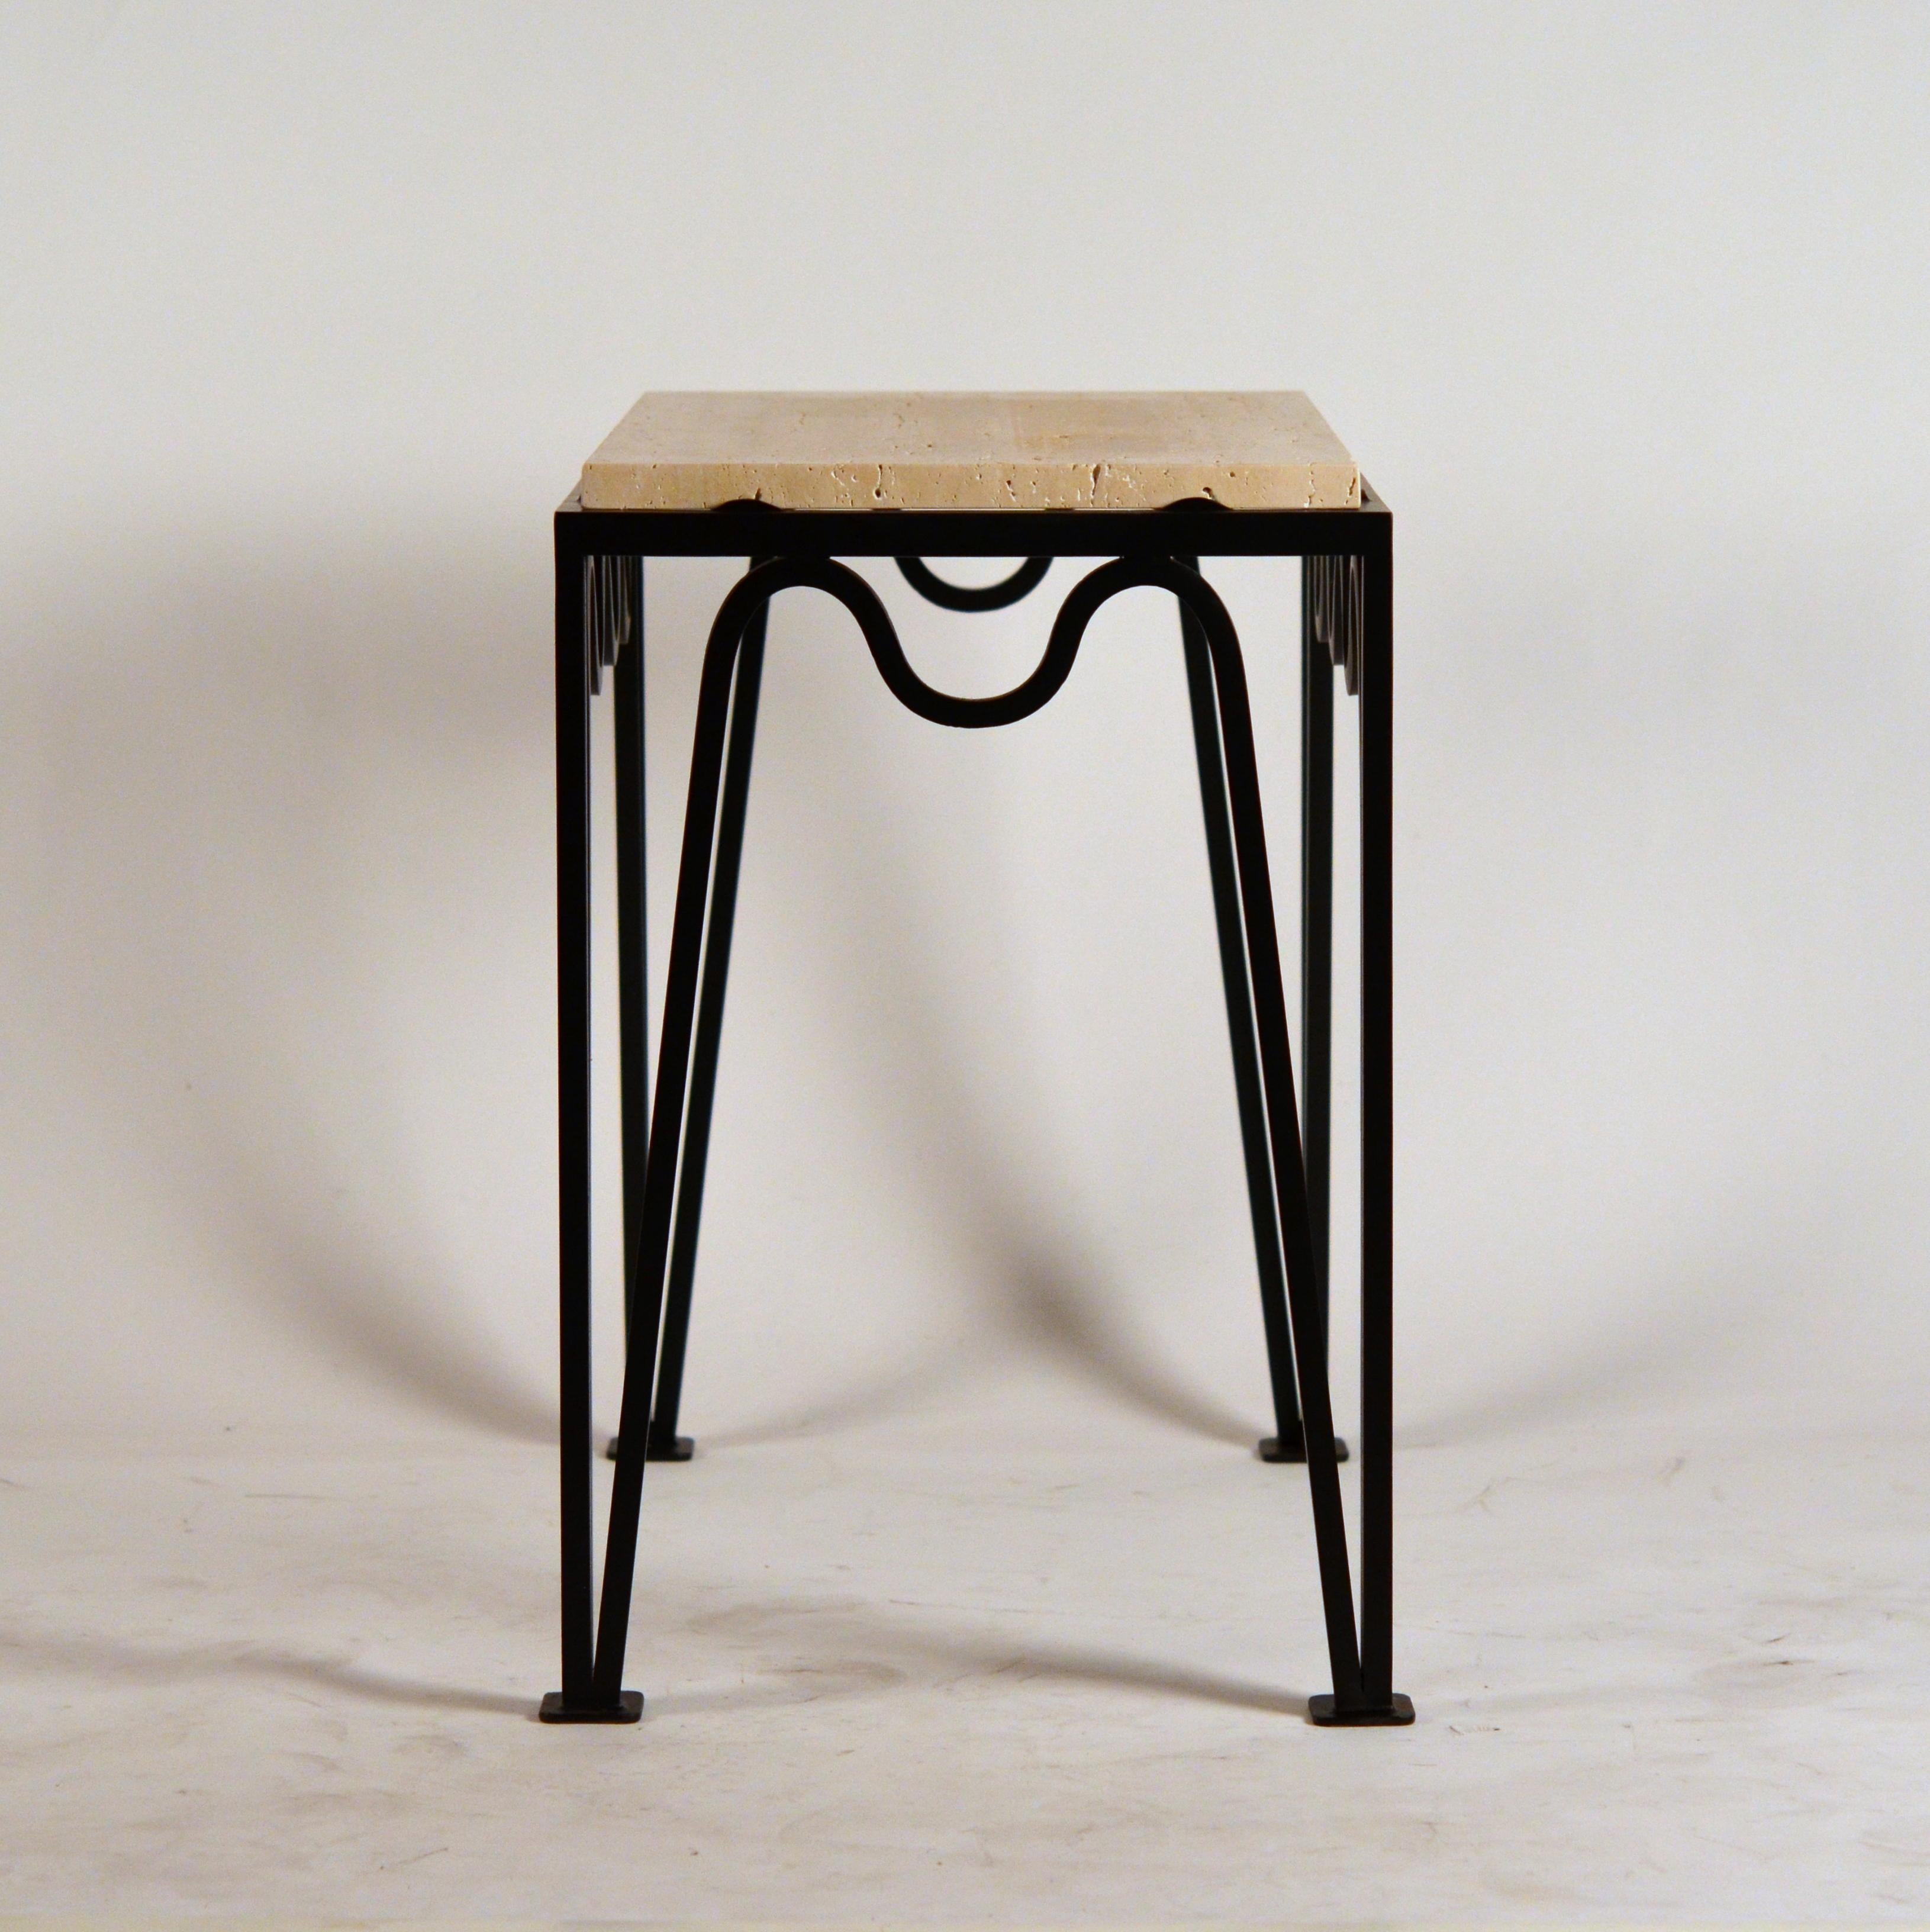 Pair of Chic 'Méandre' Black Iron and Travertine Side Tables by Design Frères For Sale 2